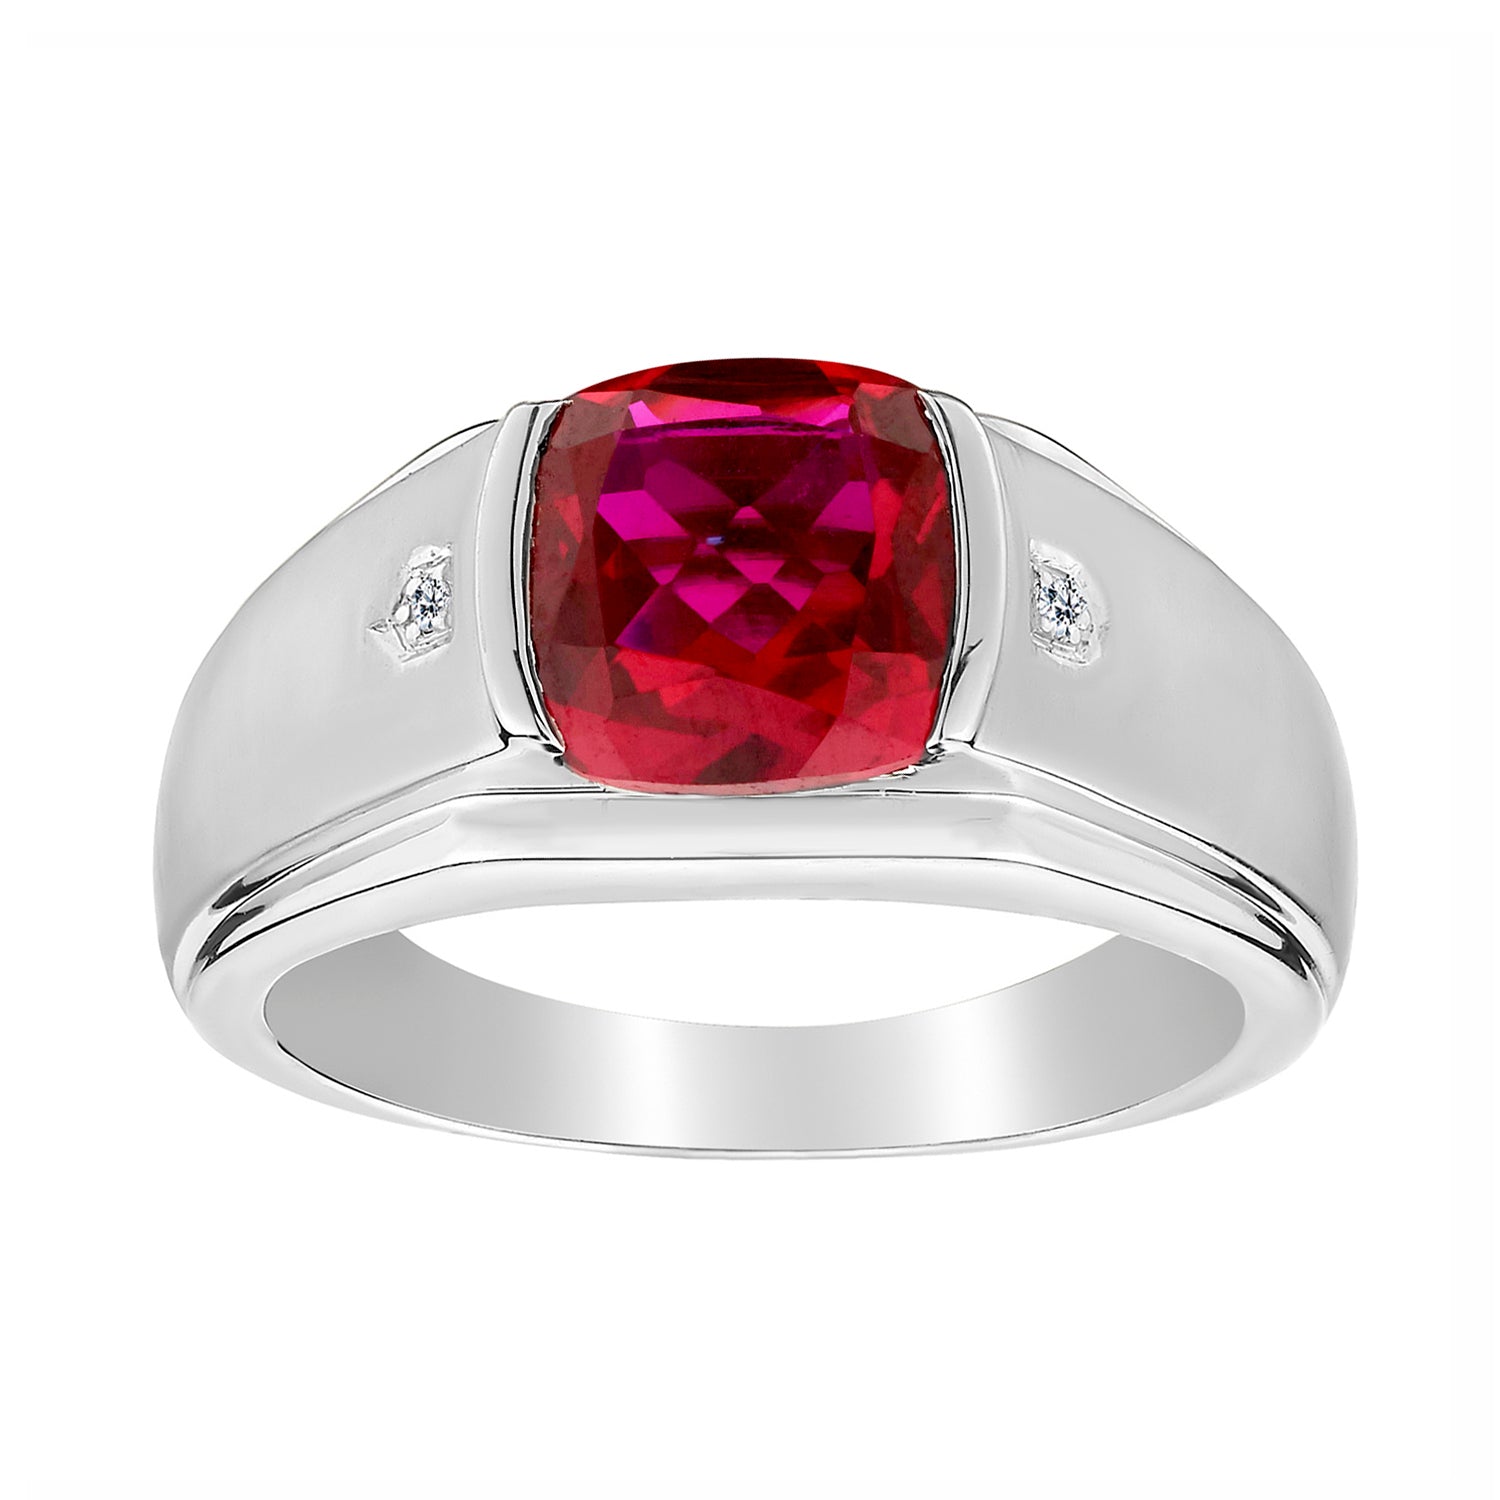 .015 CARAT DIAMOND AND CREATED RUBY GENTLEMAN'S RING, SILVER...................NOW - Griffin Jewellery Designs